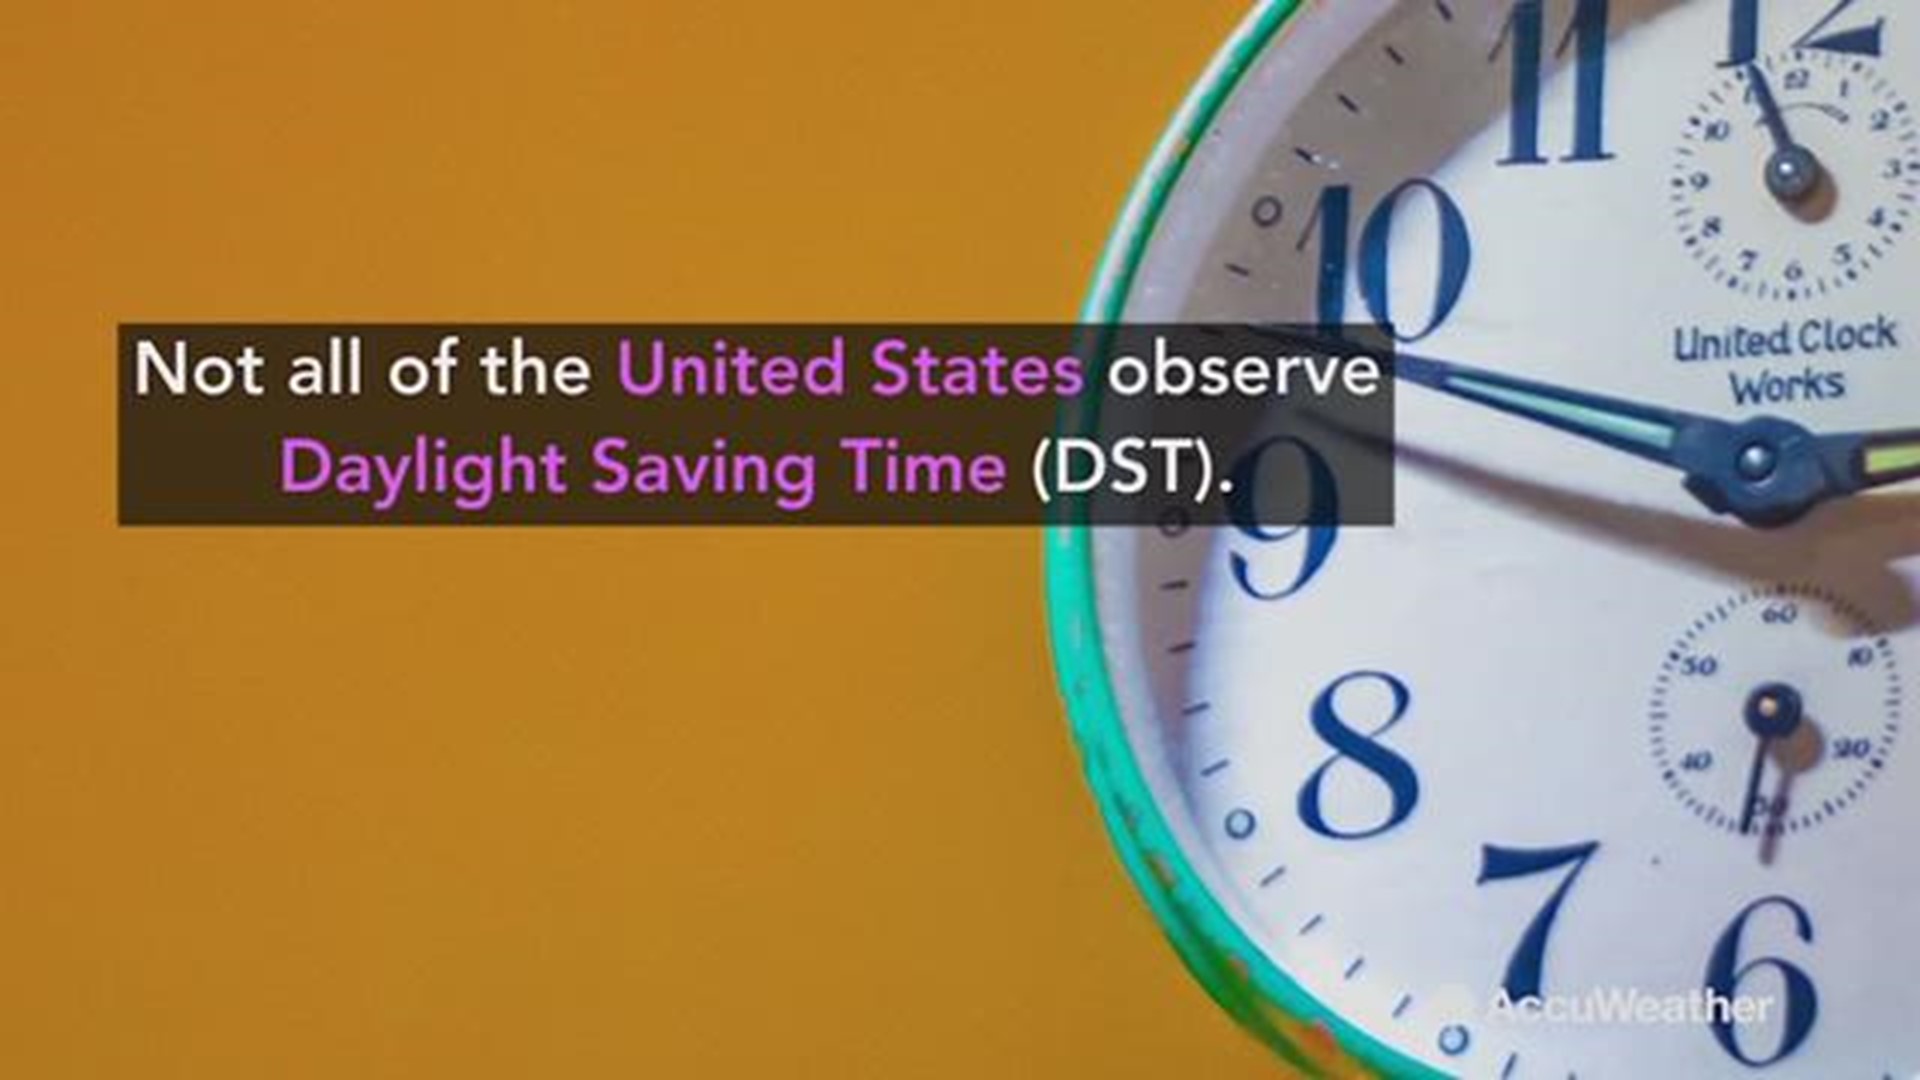 Fall back: Daylight saving time ends this weekend for most of US